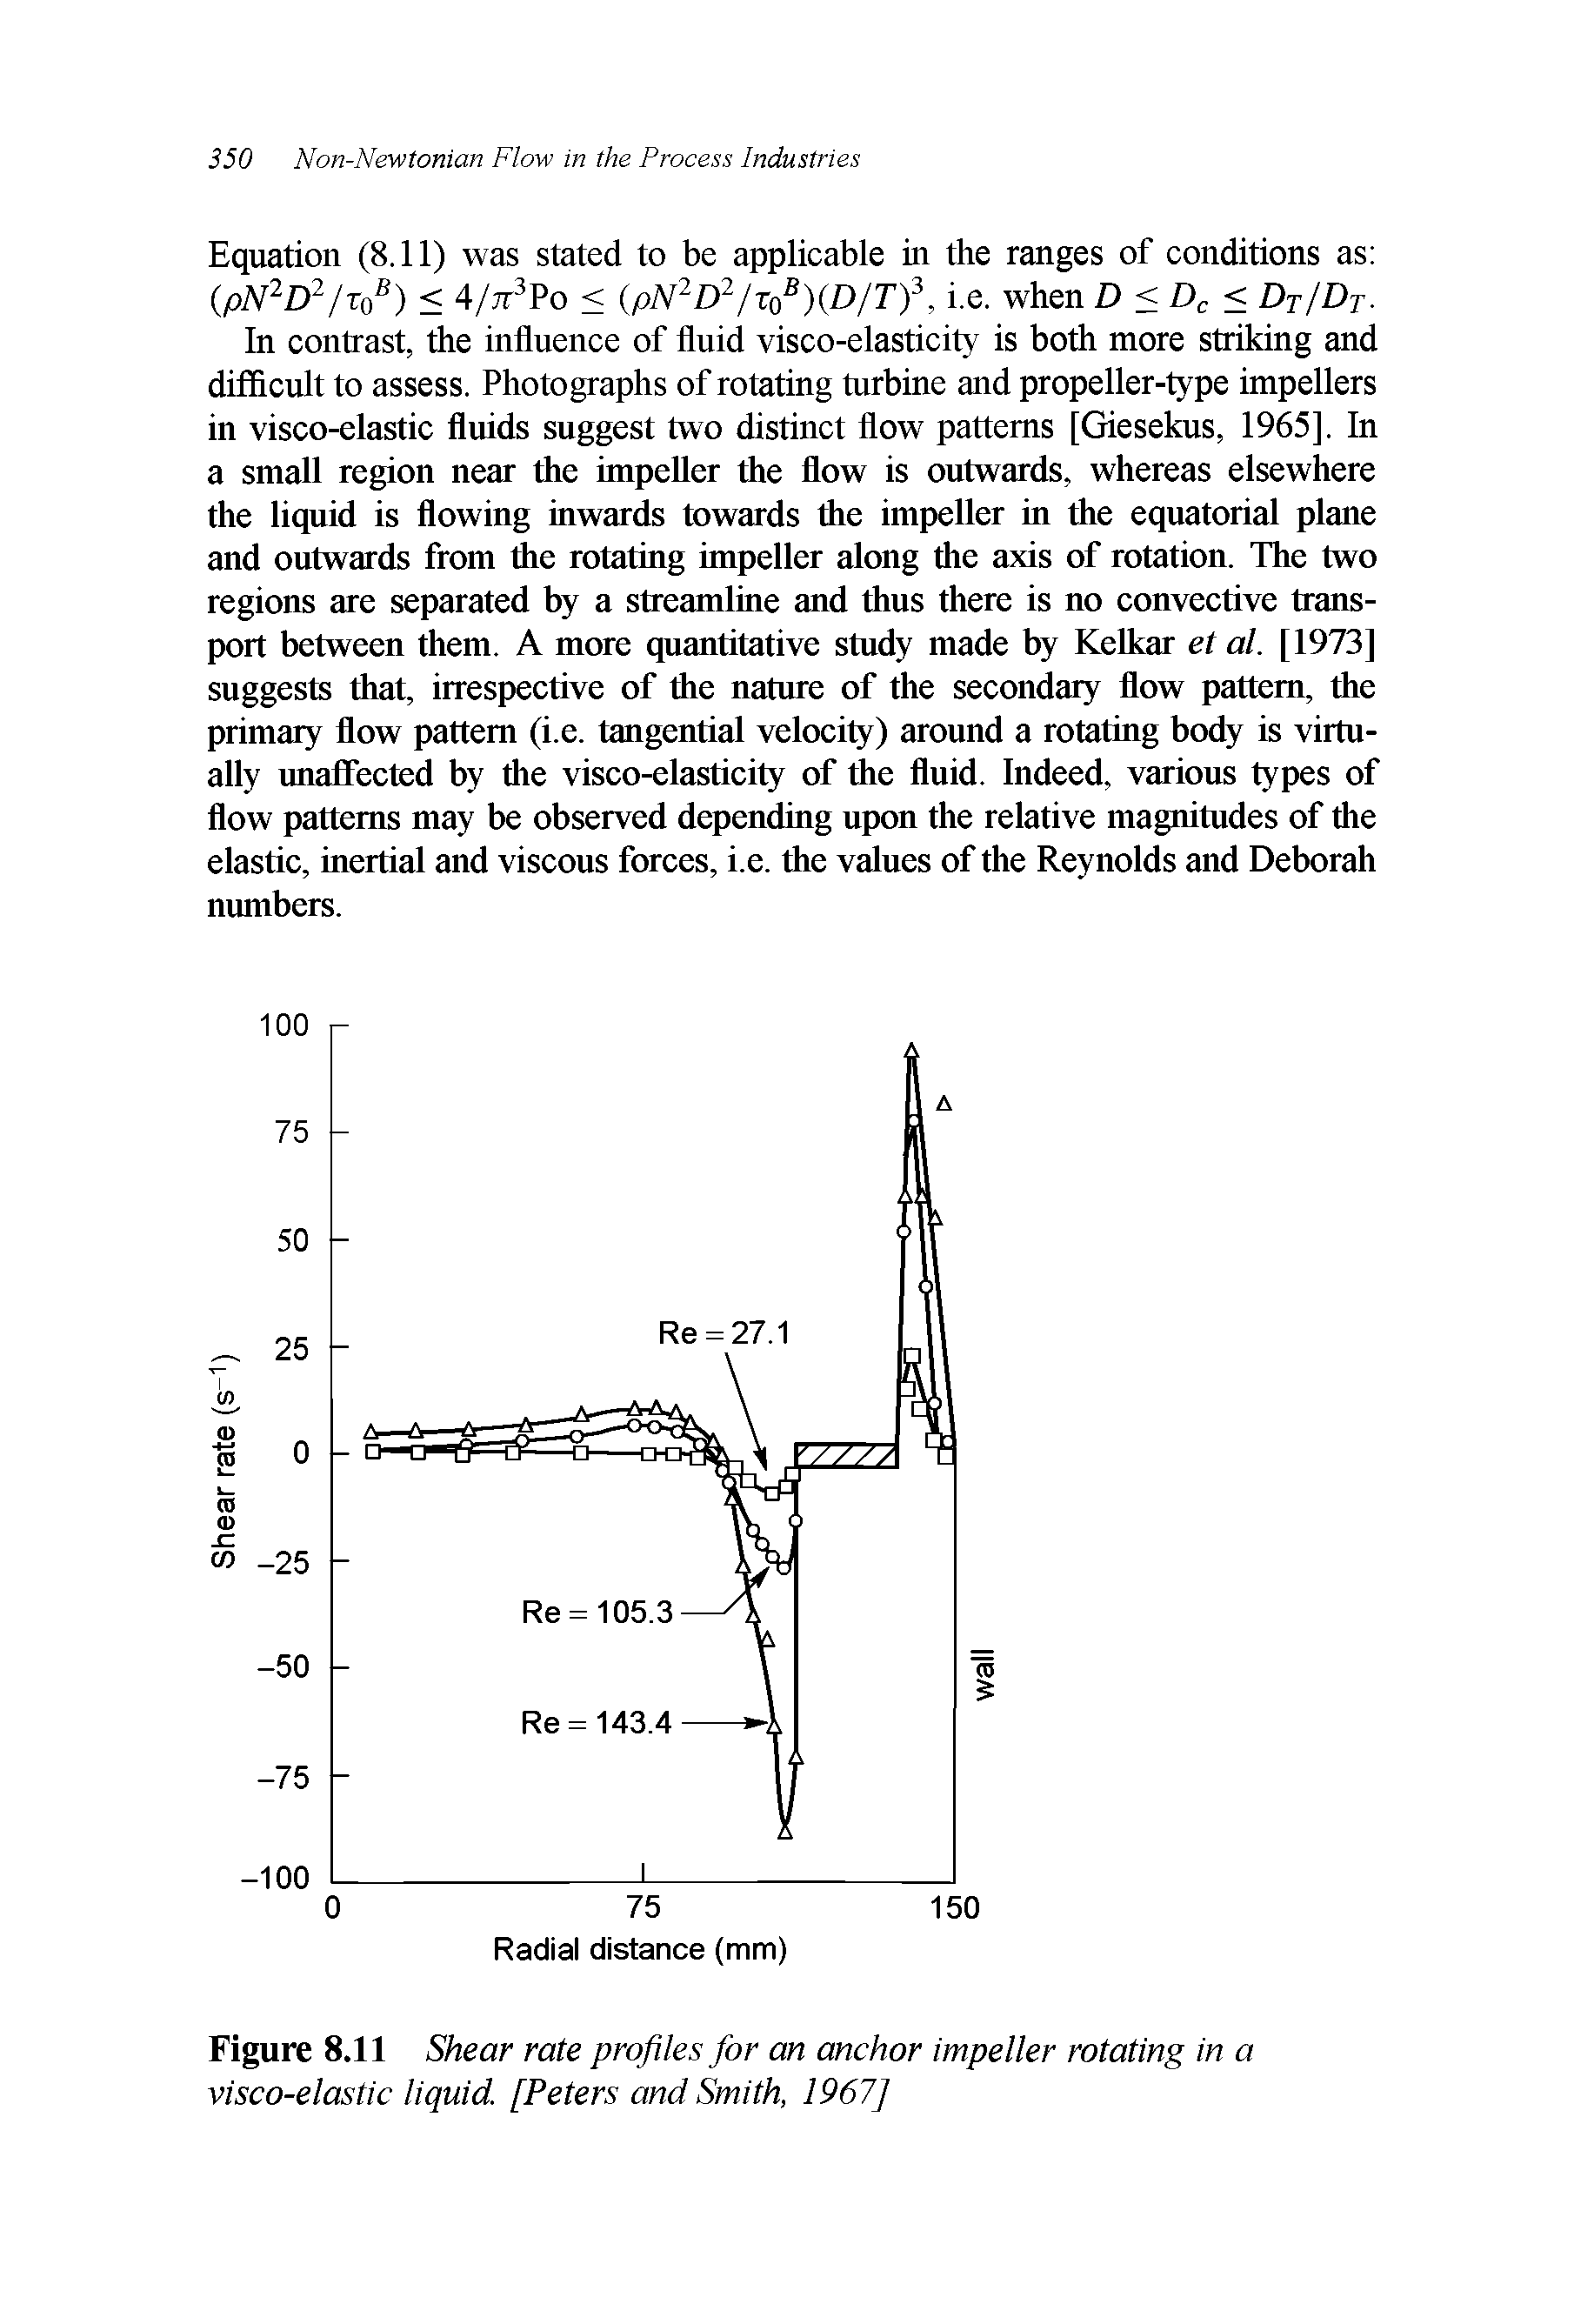 Figure 8.11 Shear rate profiles for an anchor impeller rotating in a visco-elastic liquid [Peters and Smith, 1967]...